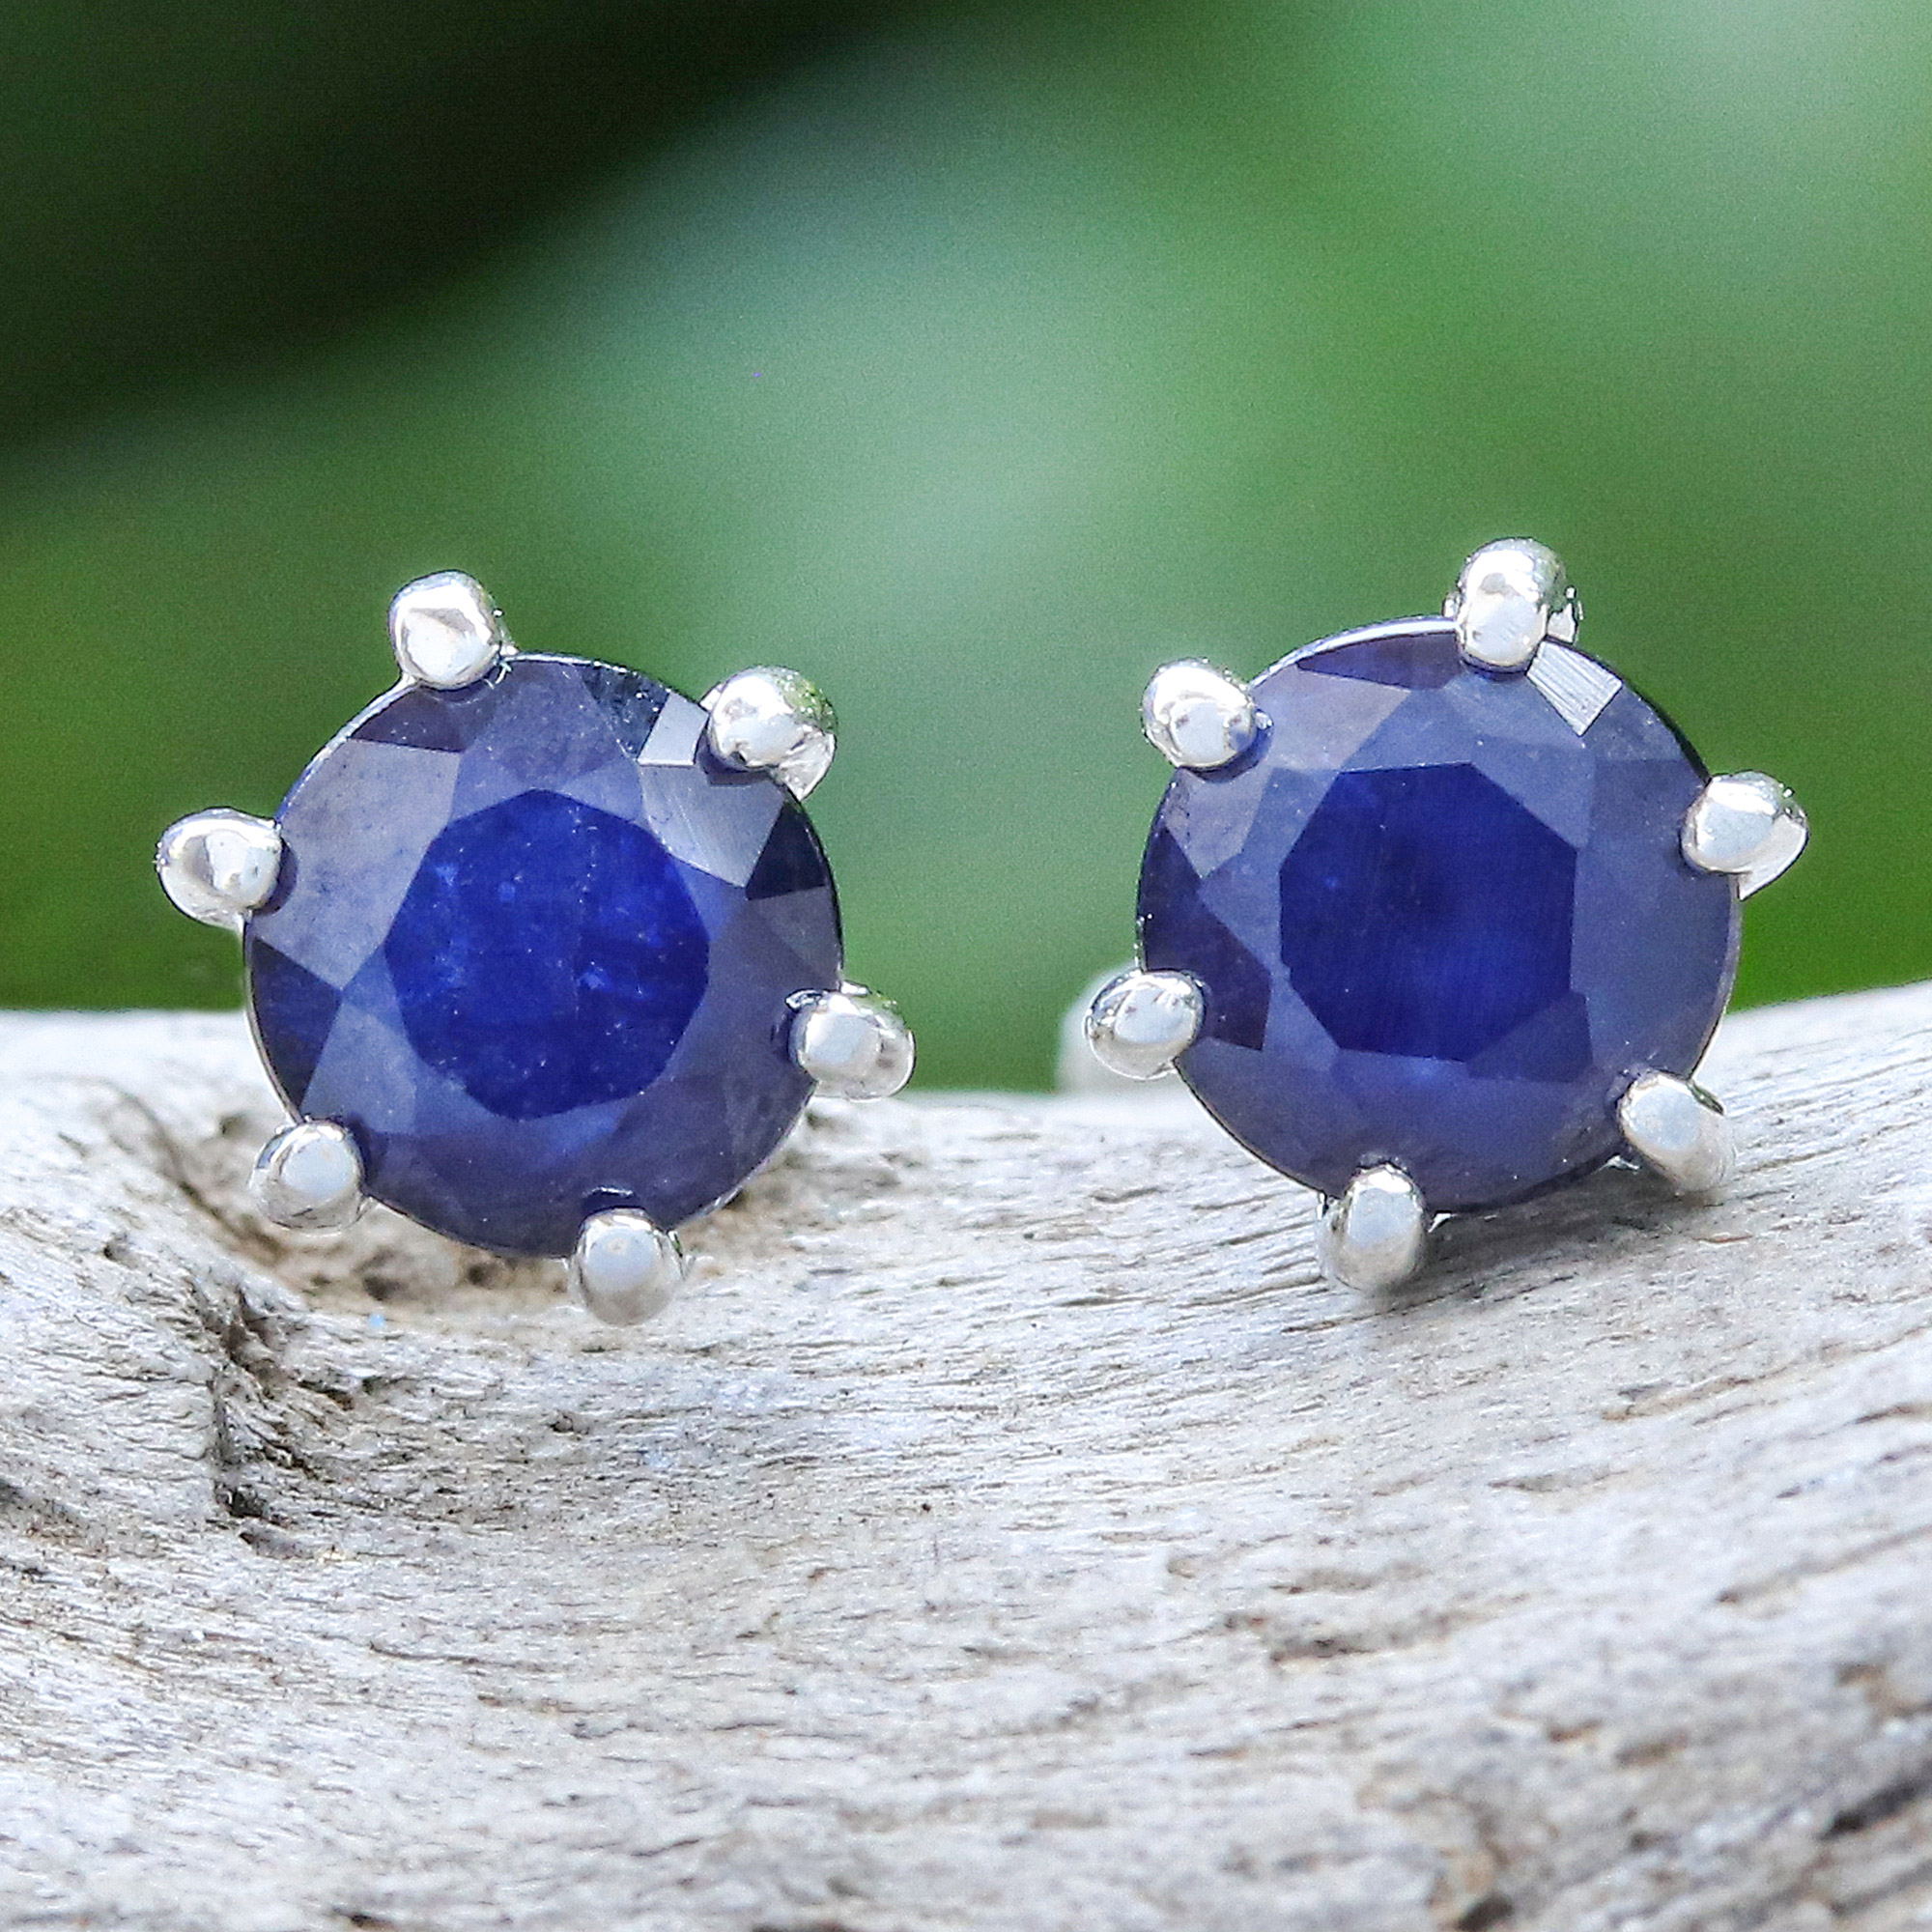 Beautiful silver925 earrings handmade with natural stone with natural stone blue sapphire handmade natural color aaaquality stone healing